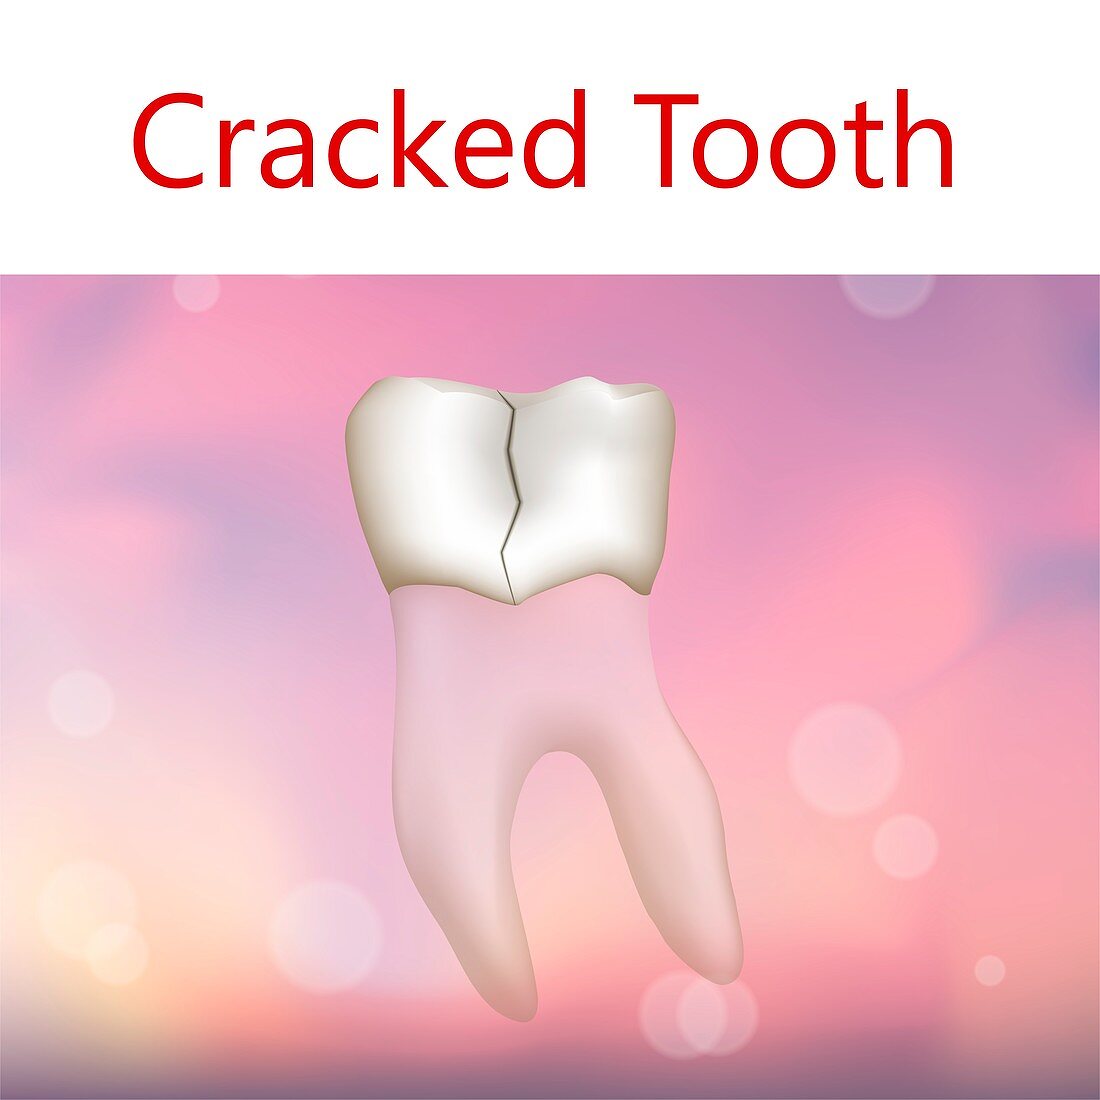 Cracked tooth, illustration